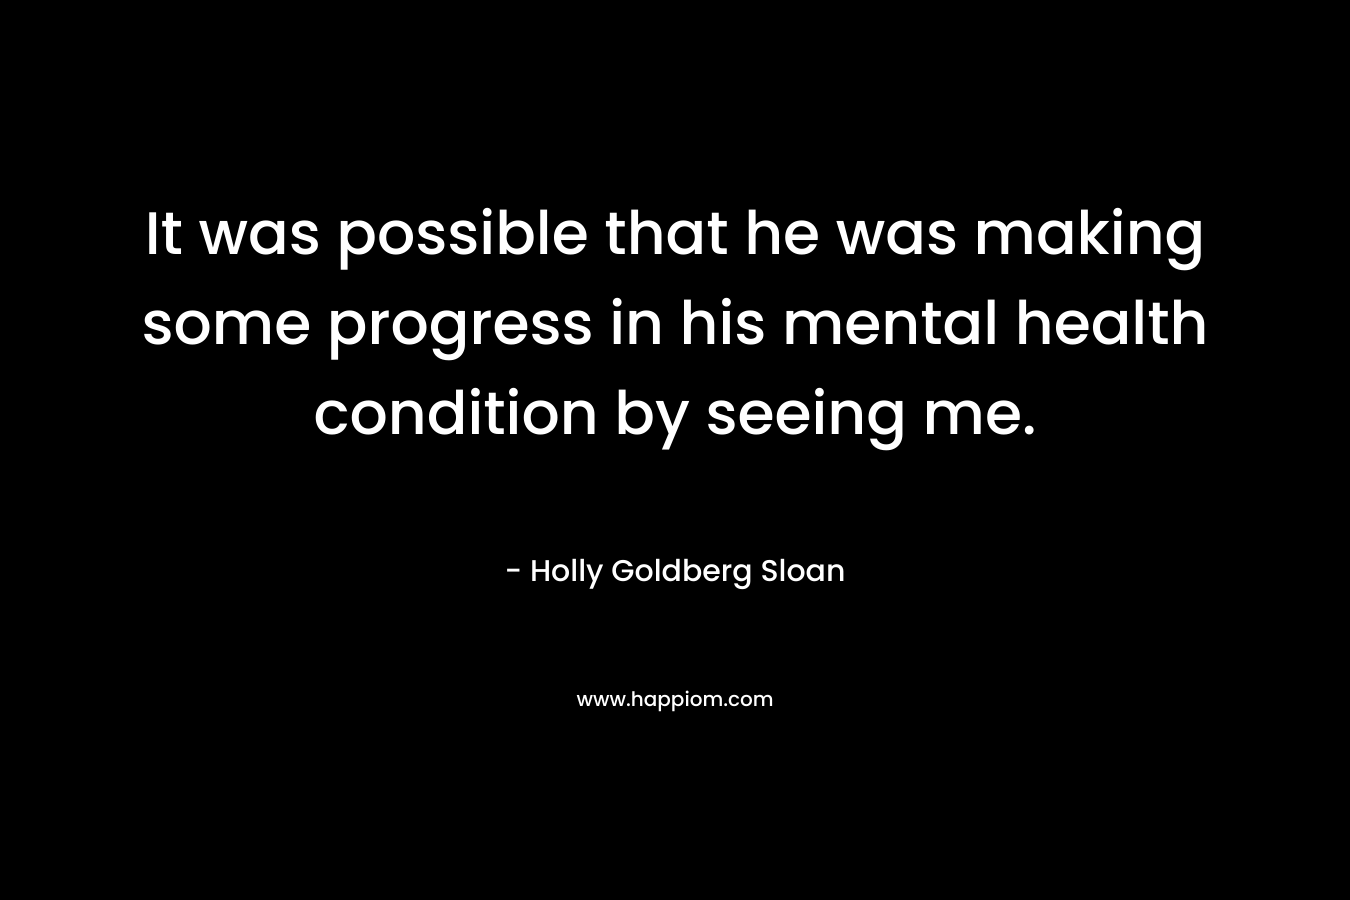 It was possible that he was making some progress in his mental health condition by seeing me.